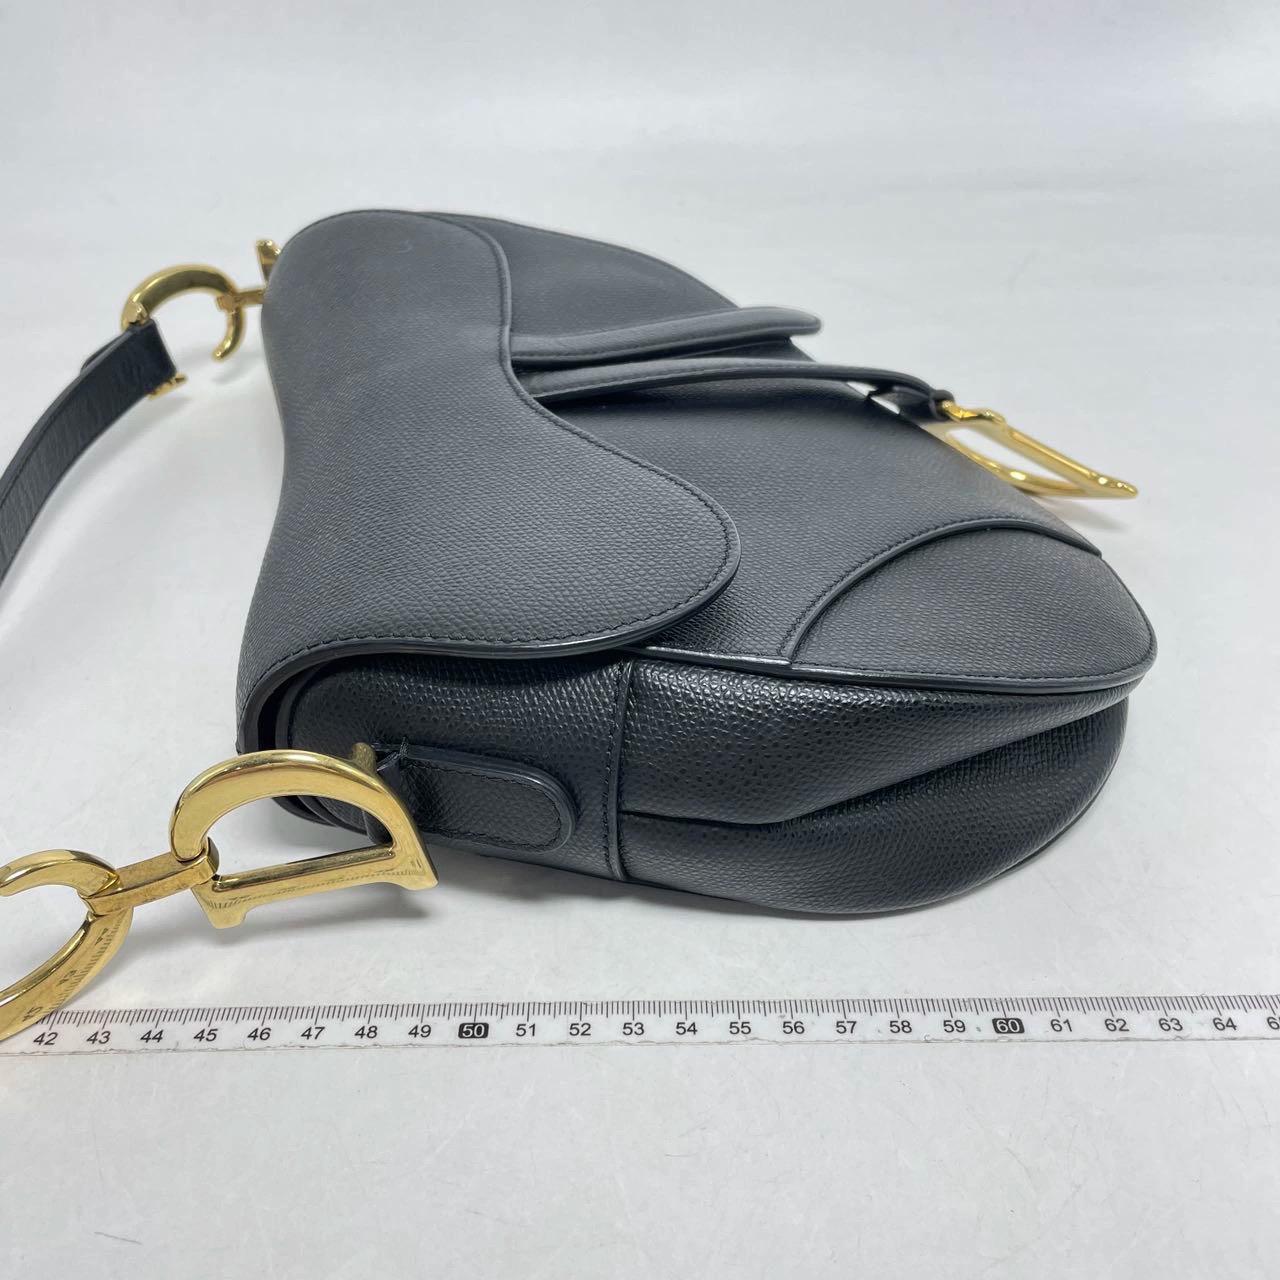 2018 Dior Saddle bag, crafted in black grained calfskin leather, the legendary design comes in size medium, features a magnetic flap, and antique gold-finish CD signature on both sides of the strap. The Saddle bag may be carried by hand worn on the